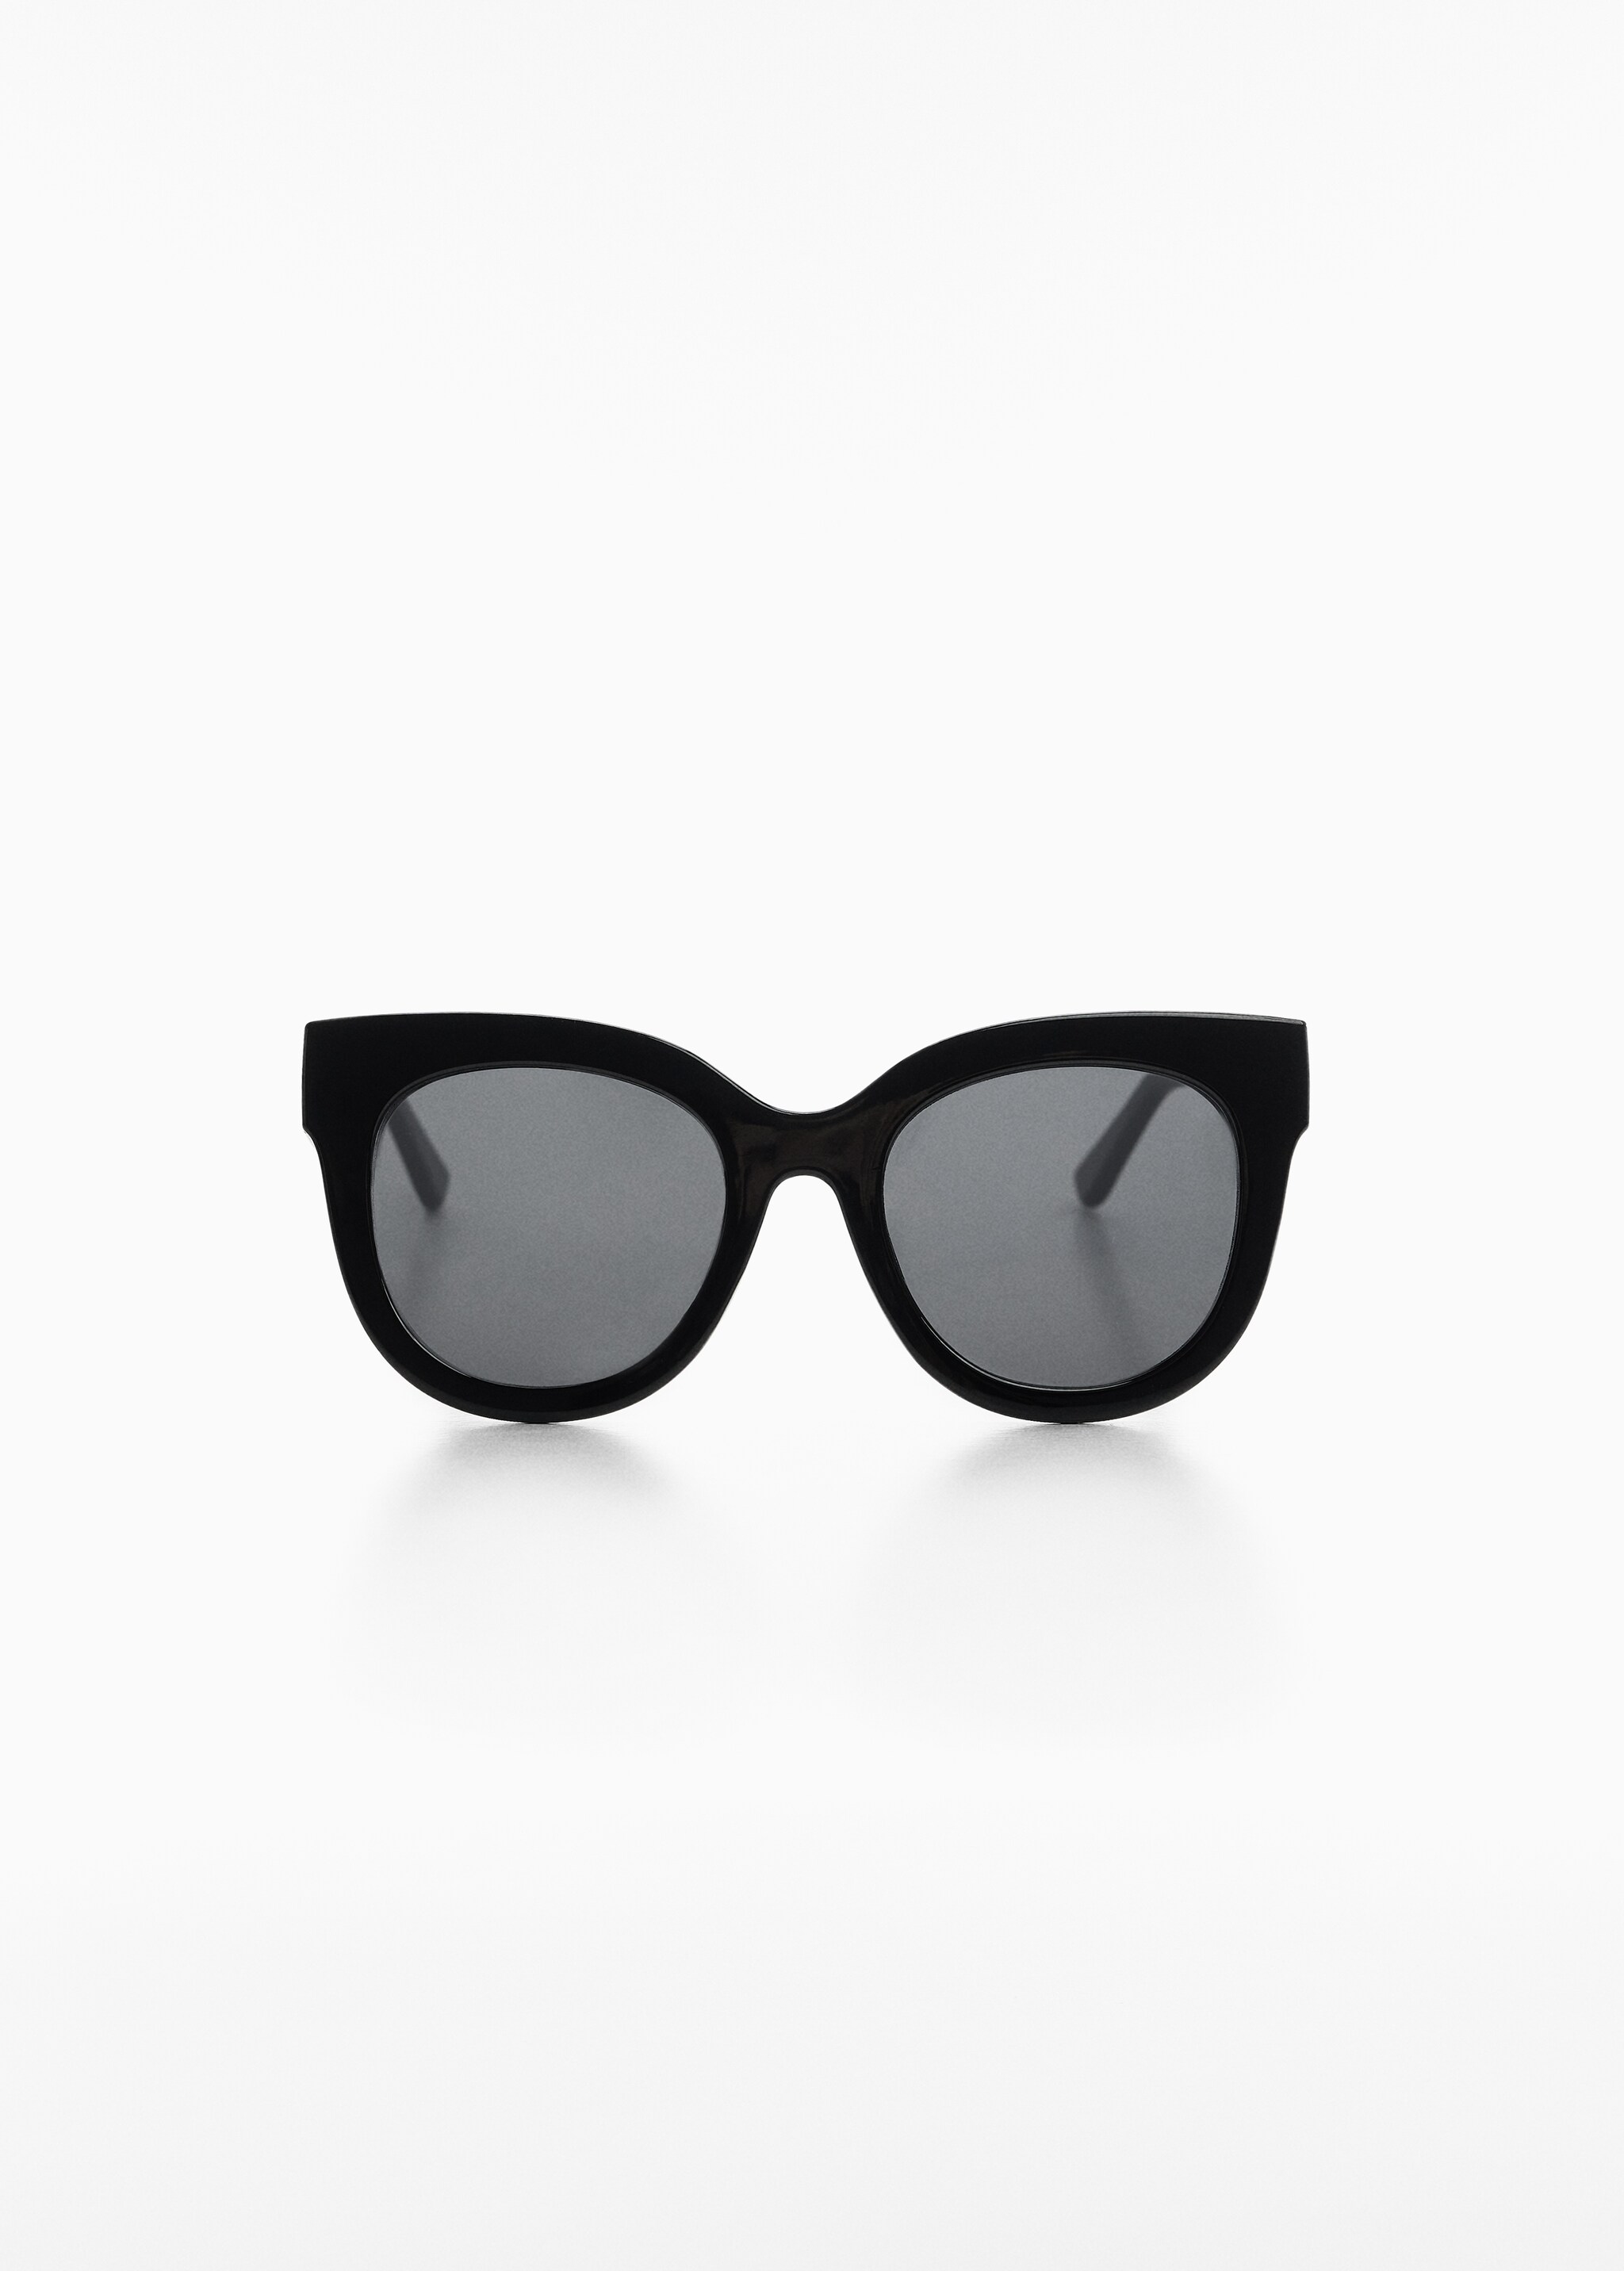 Retro style sunglasses - Article without model